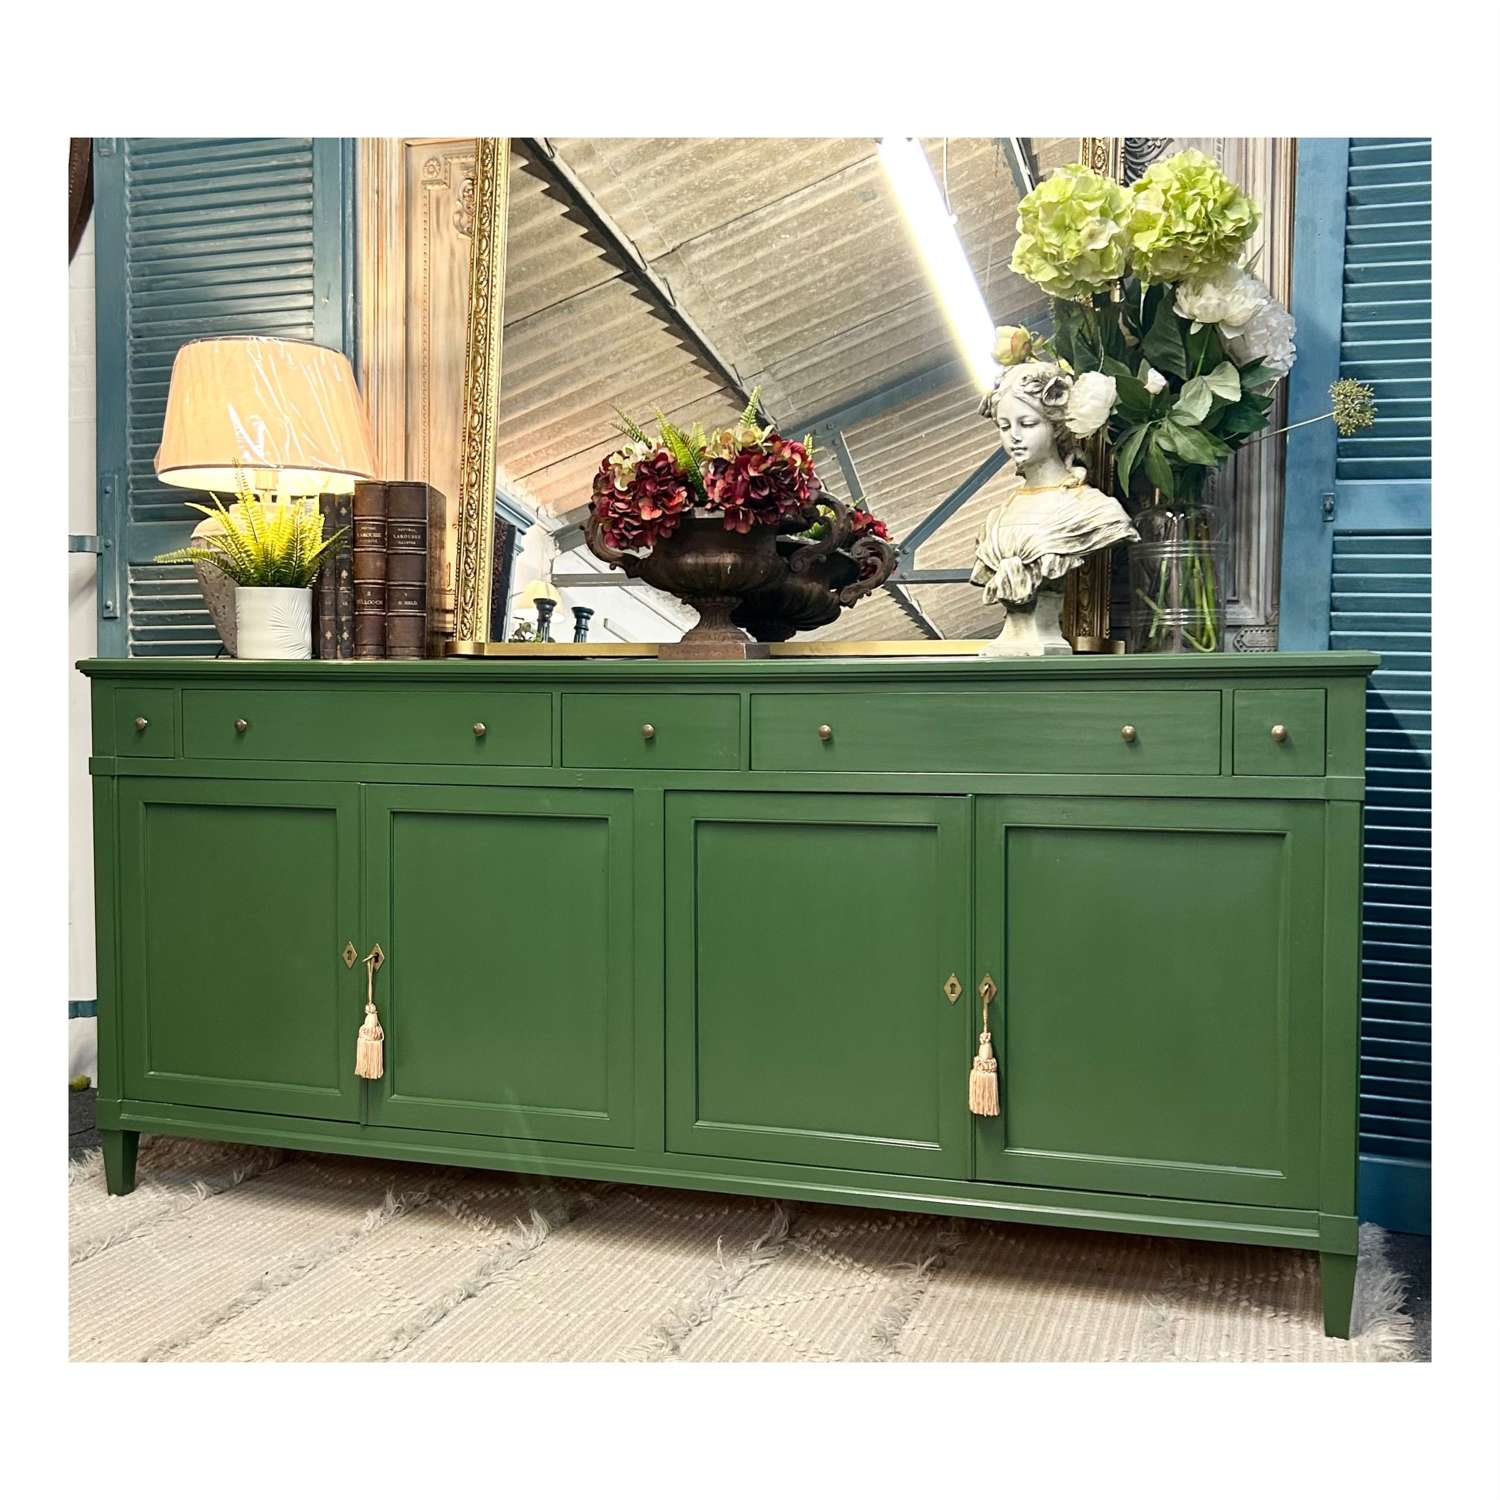 Large French Cherrywood Sideboard in Lush Green Beverly 210cm long